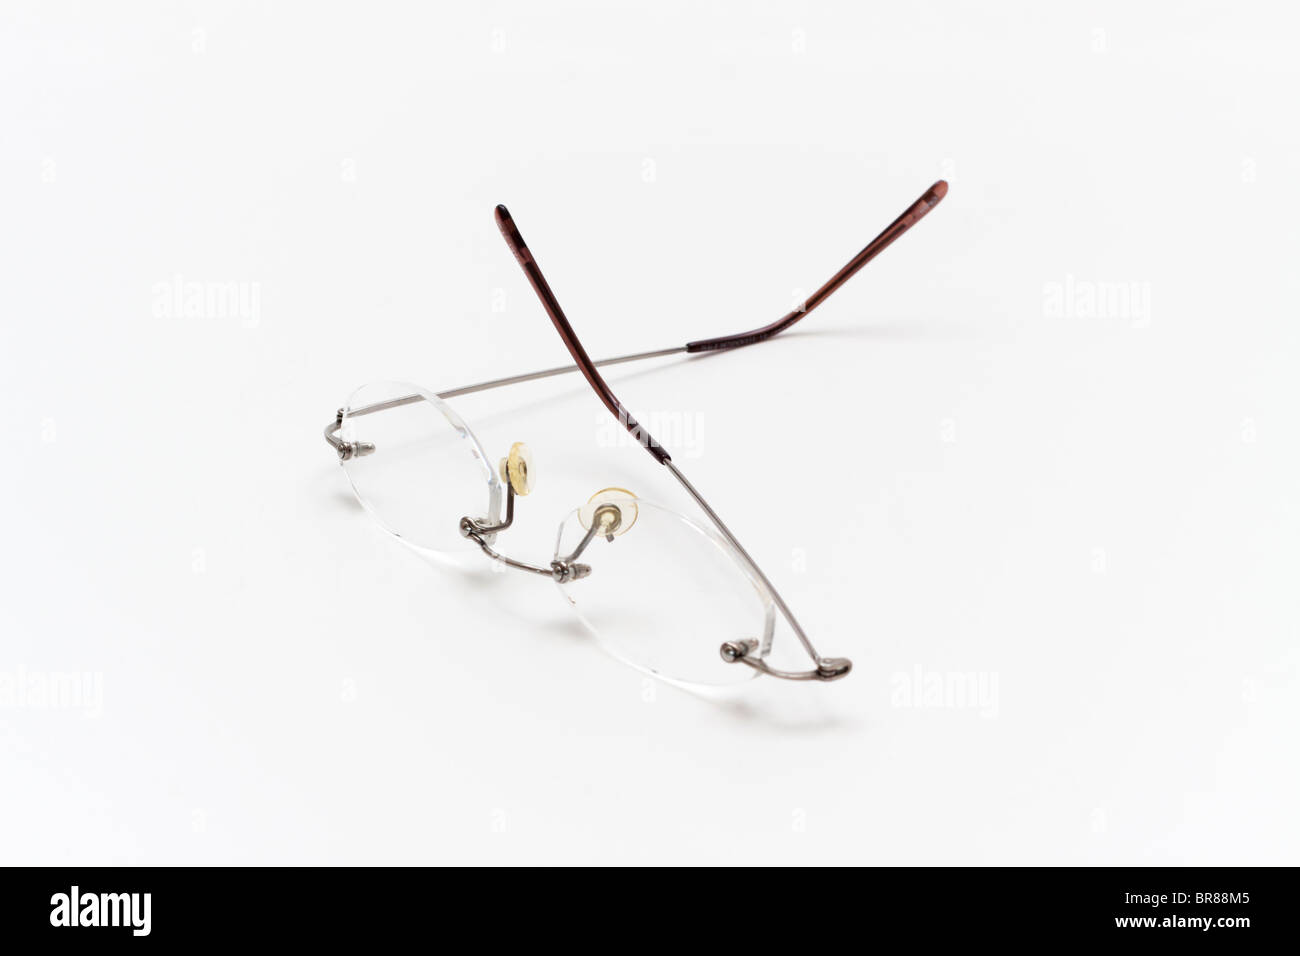 A pair of reading glasses Stock Photo